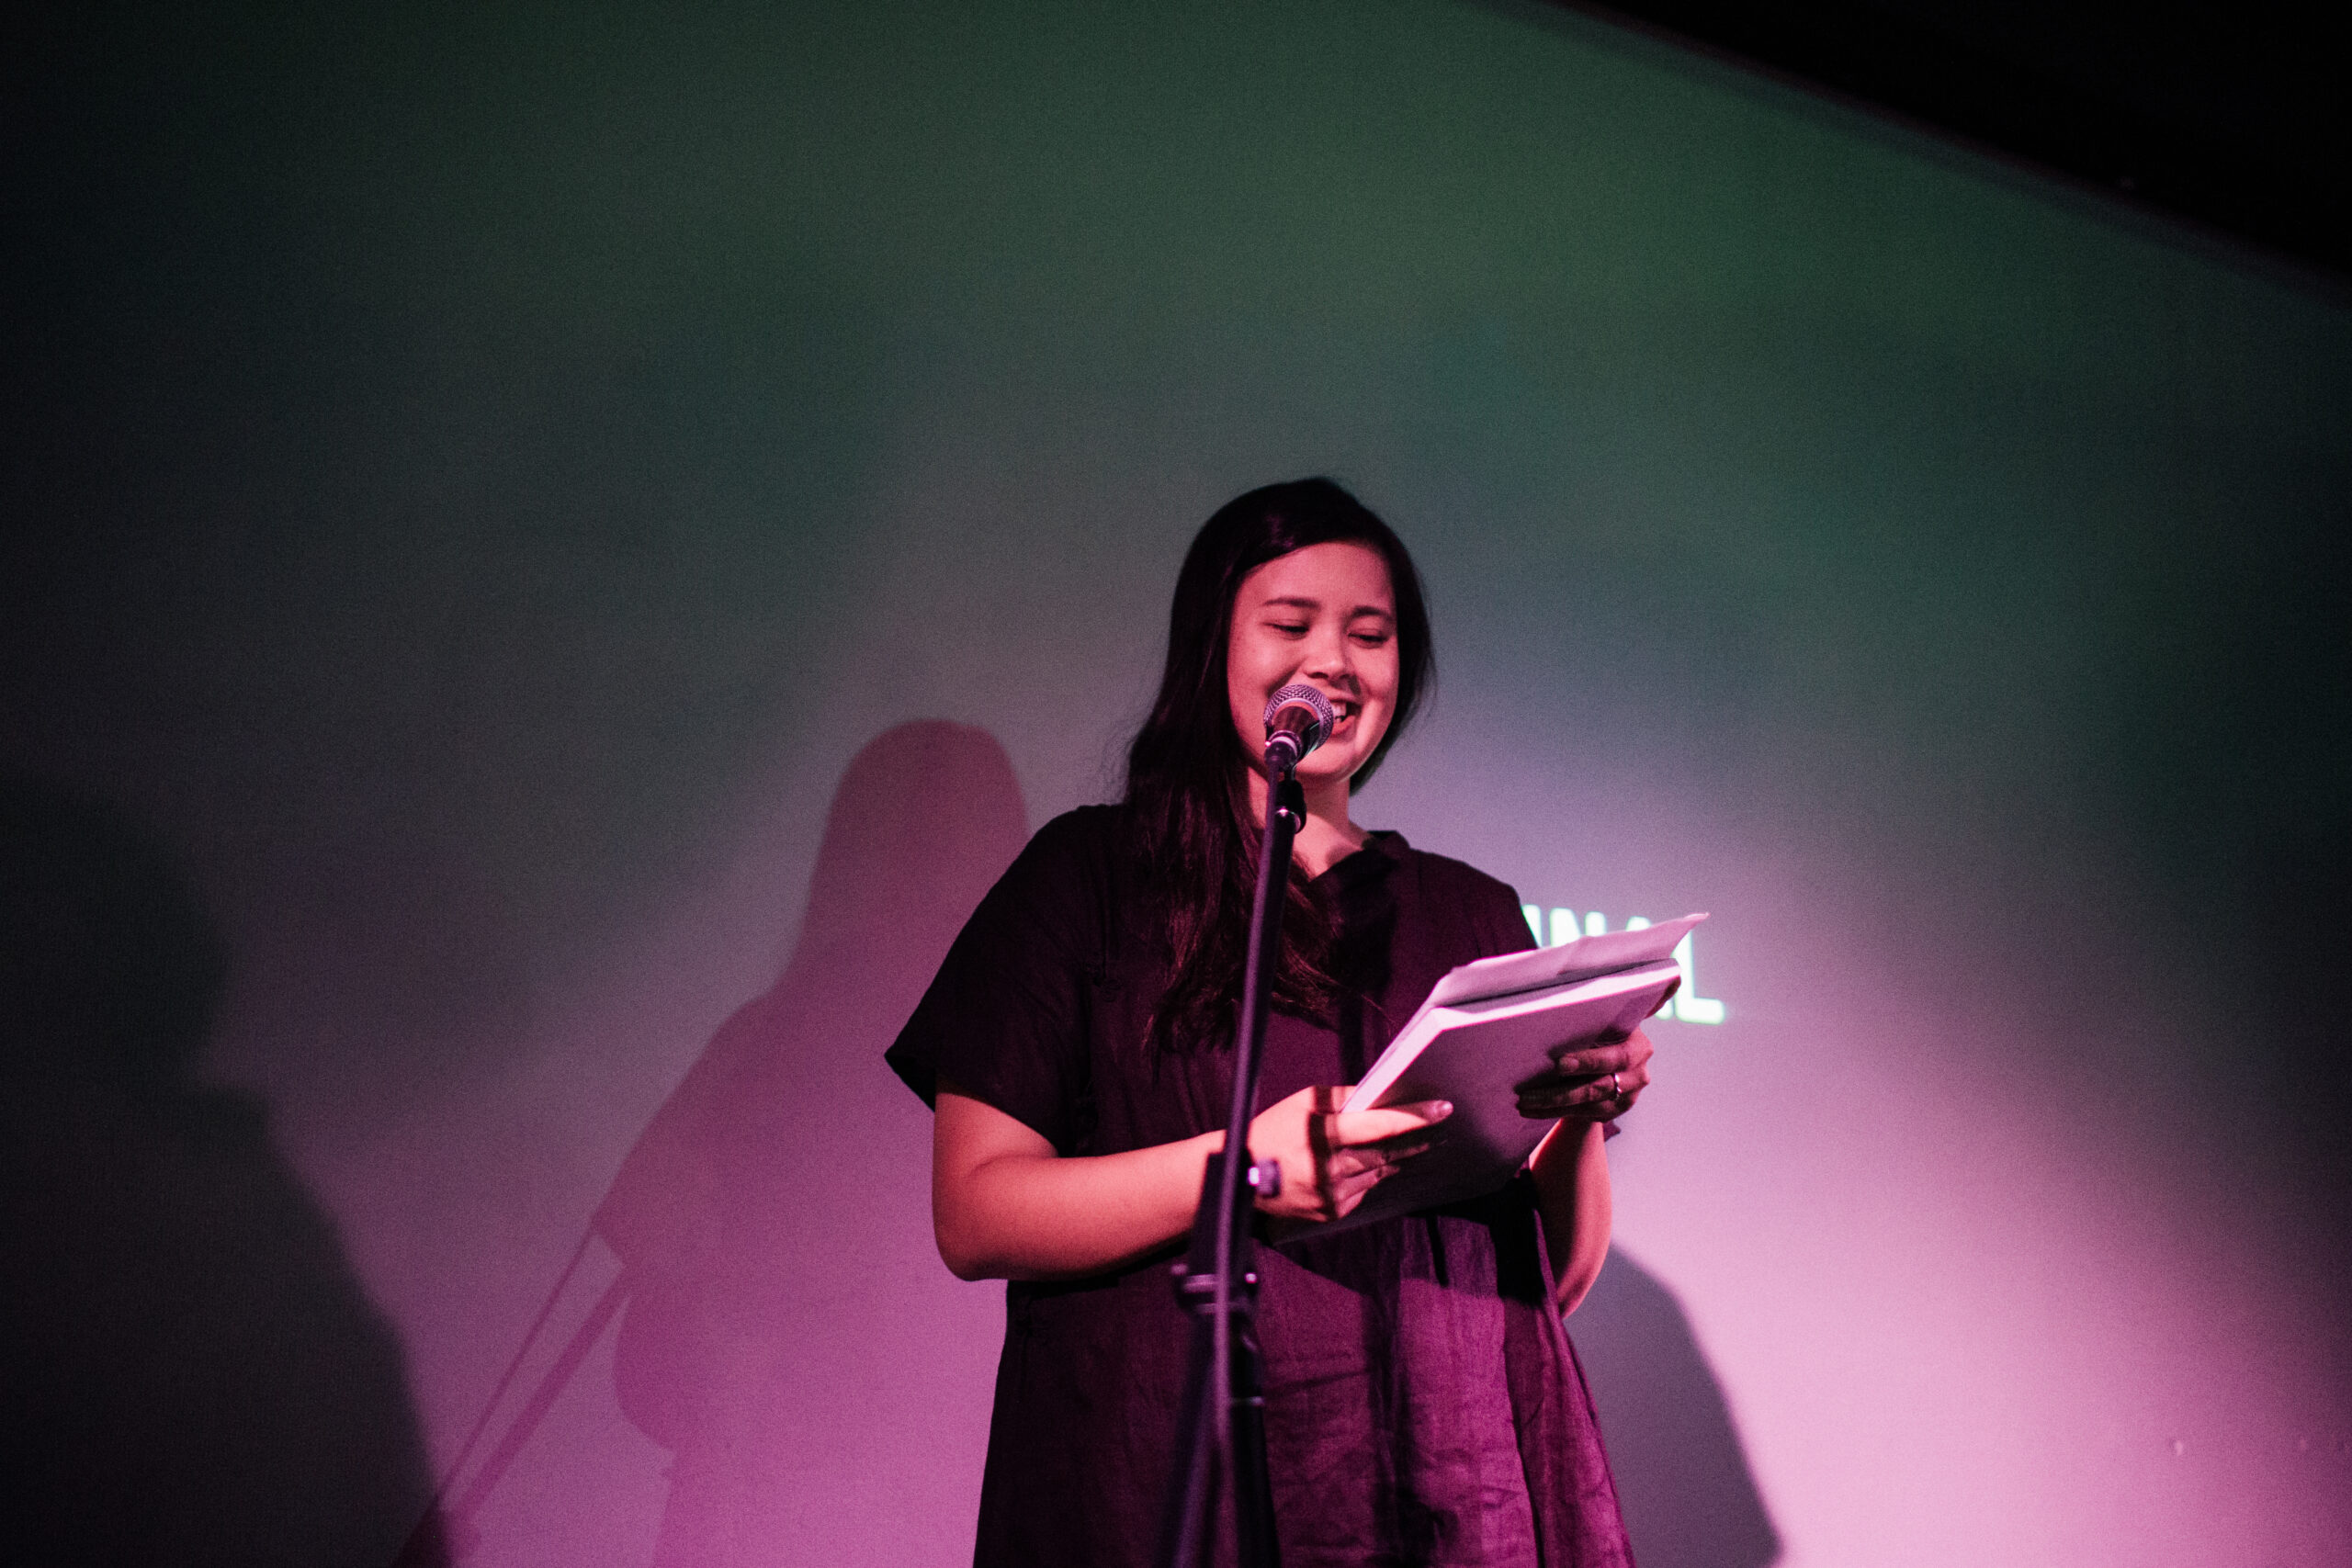 Leah Jing McIntosh looking radiant and smiling as she reads from some papers on top of a book, she is standing on stage in front of a microphone stand in multihued light. Leah has dark, black hair and is wearing flowy dark coloured linen clothing.